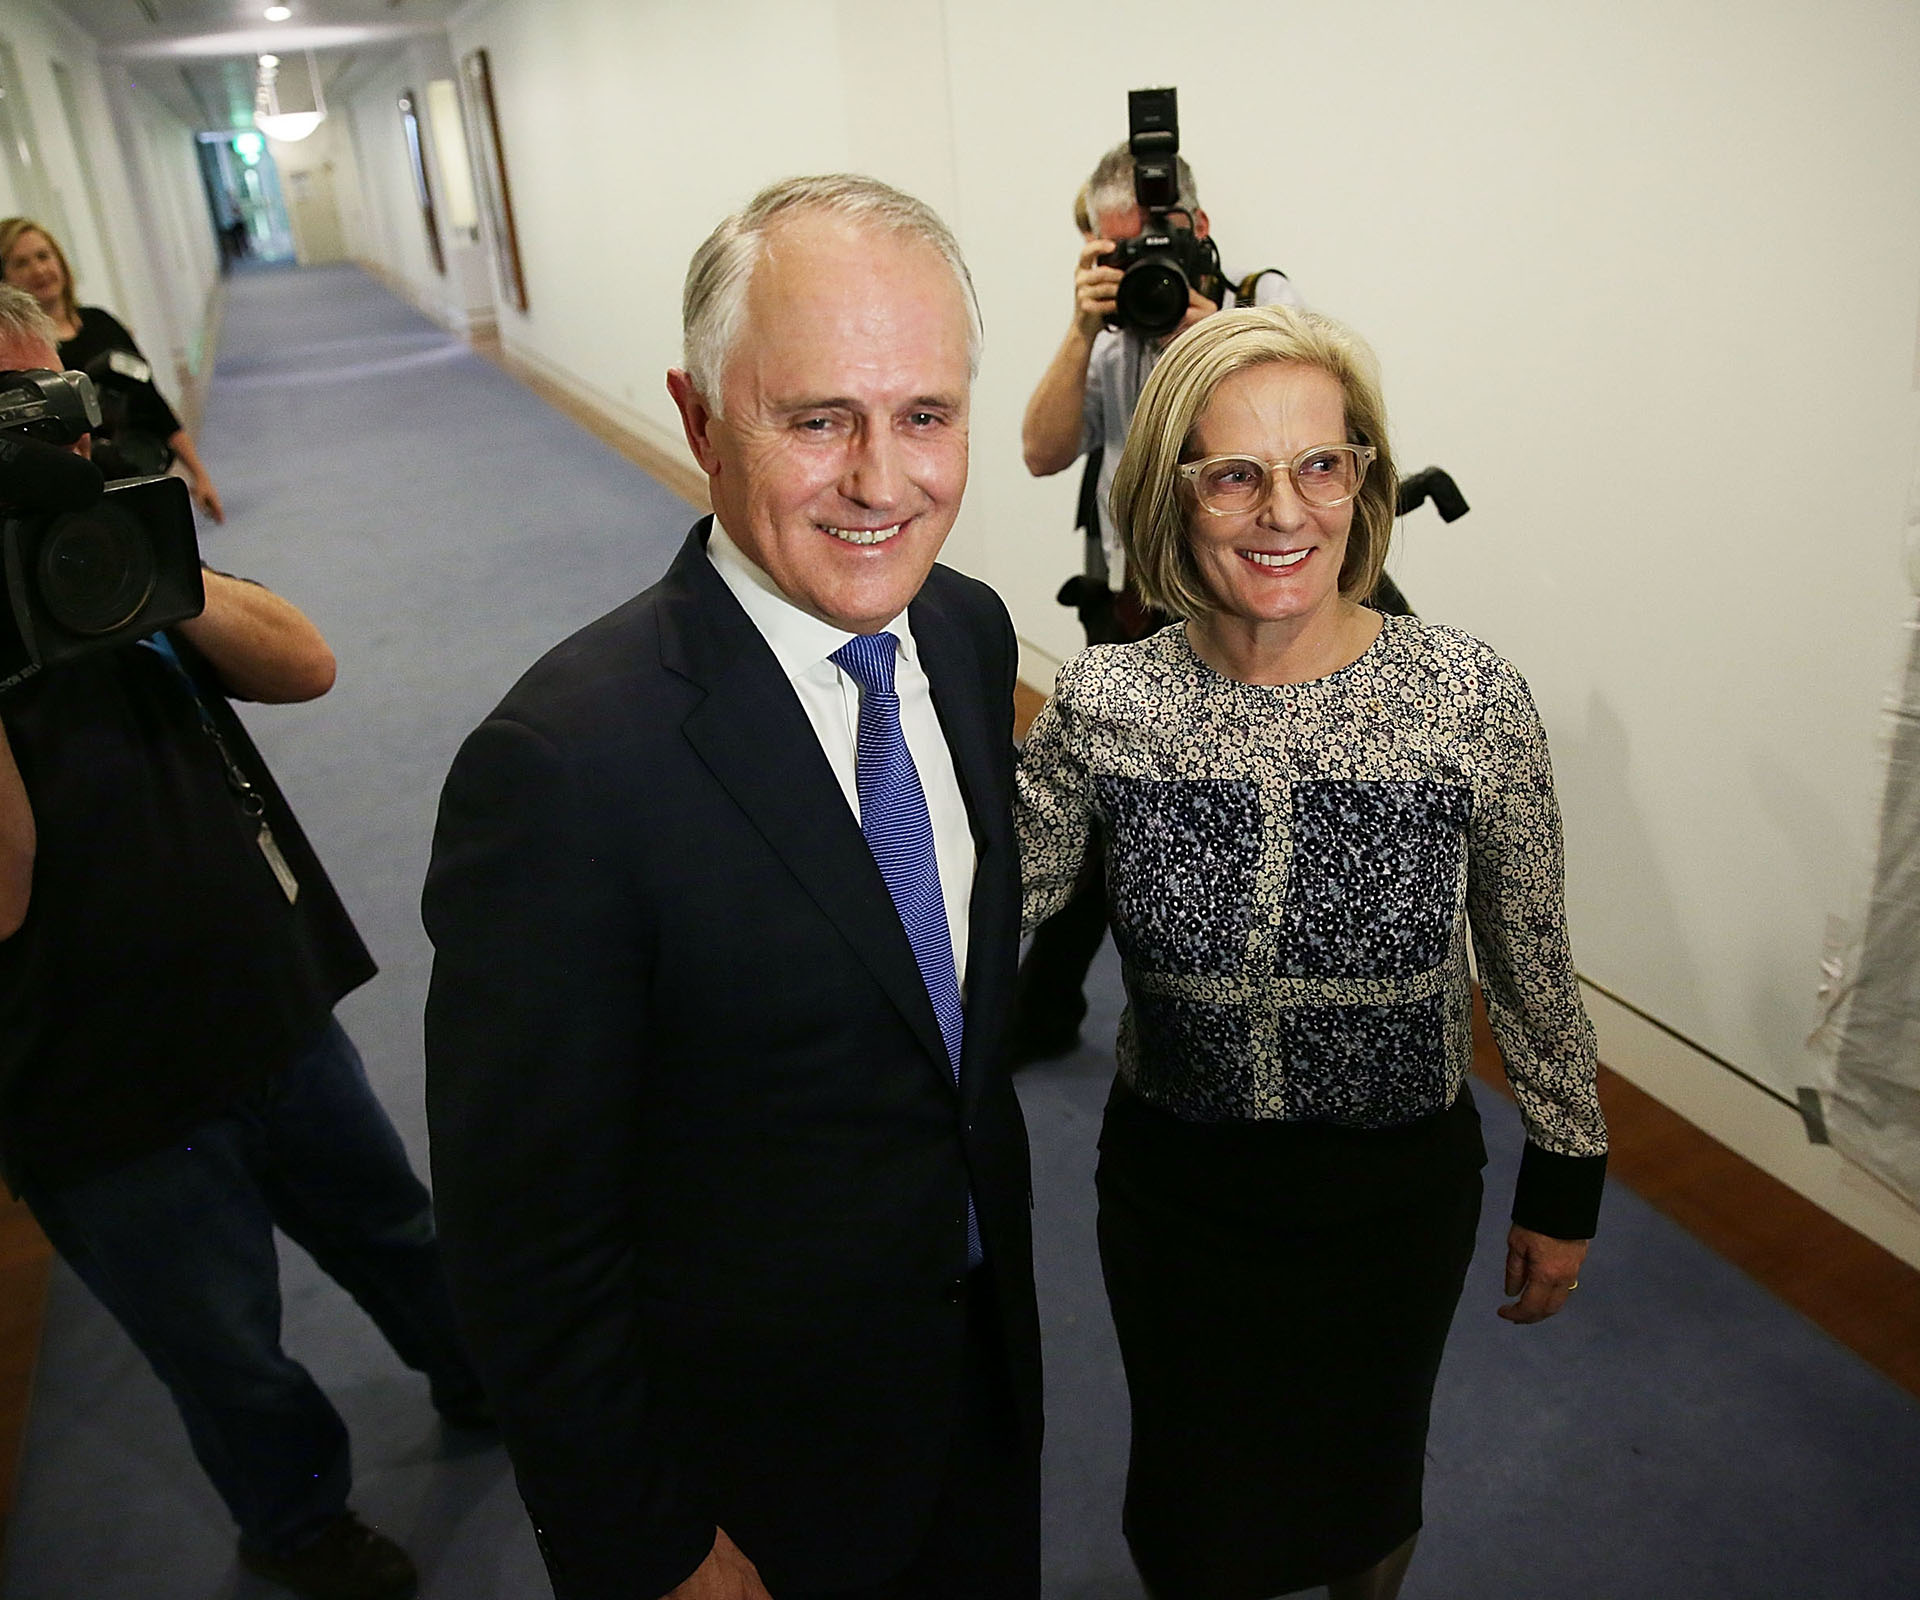 Lucy Turnbull: The power behind Malcolm